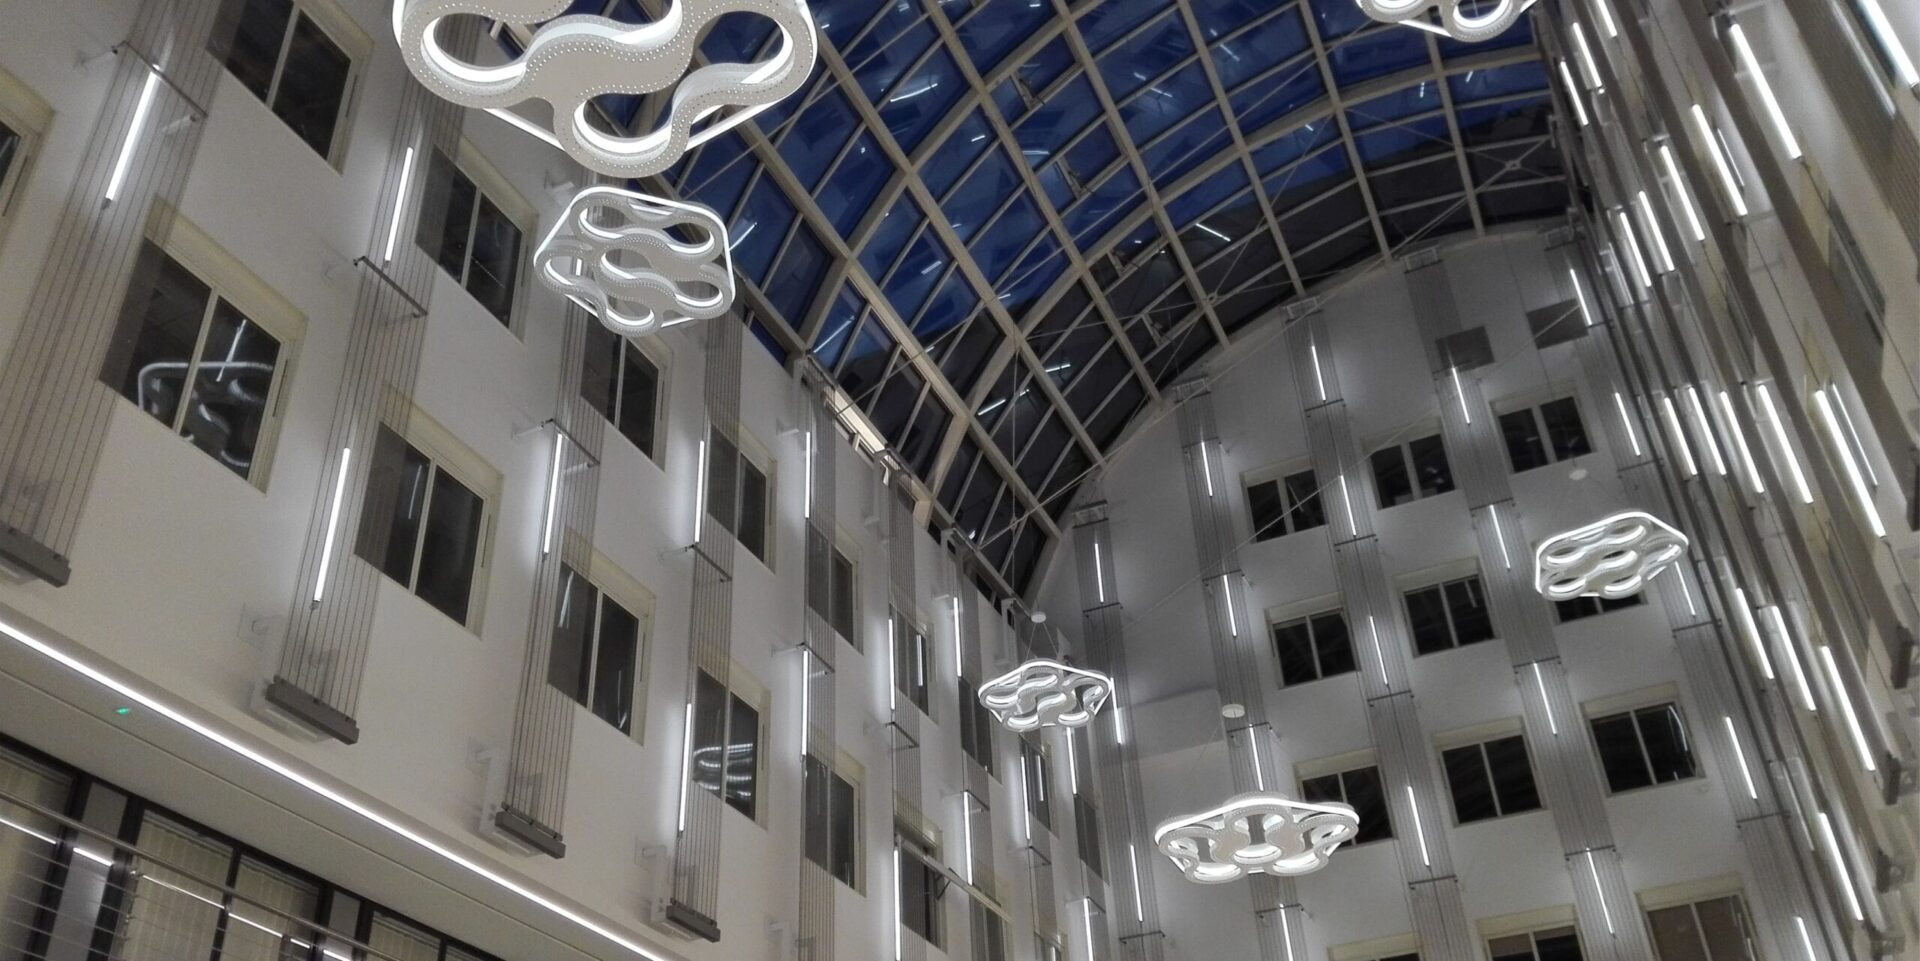 Manufacturing of the prototype of the unique, complicated luminaire in the hall of Warsaw’s building.